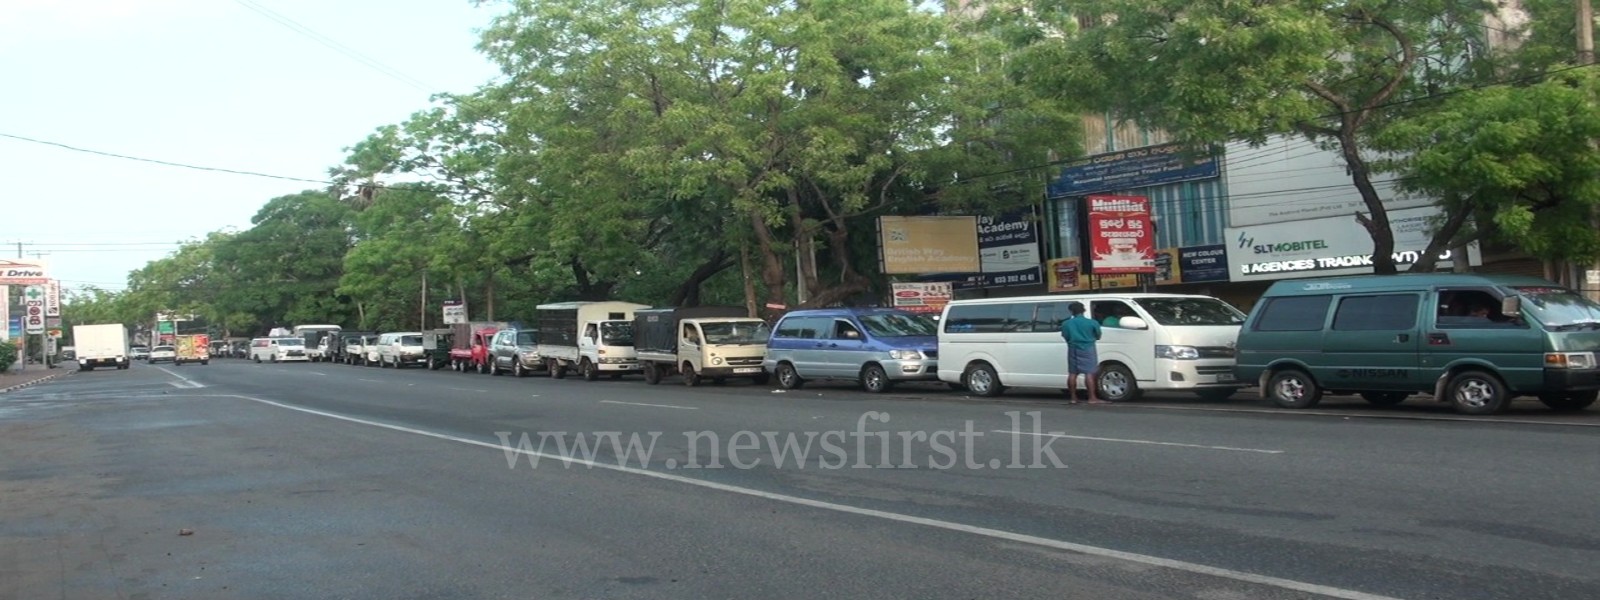 Long queues for fuel as curfew lifted briefly on Friday (13)